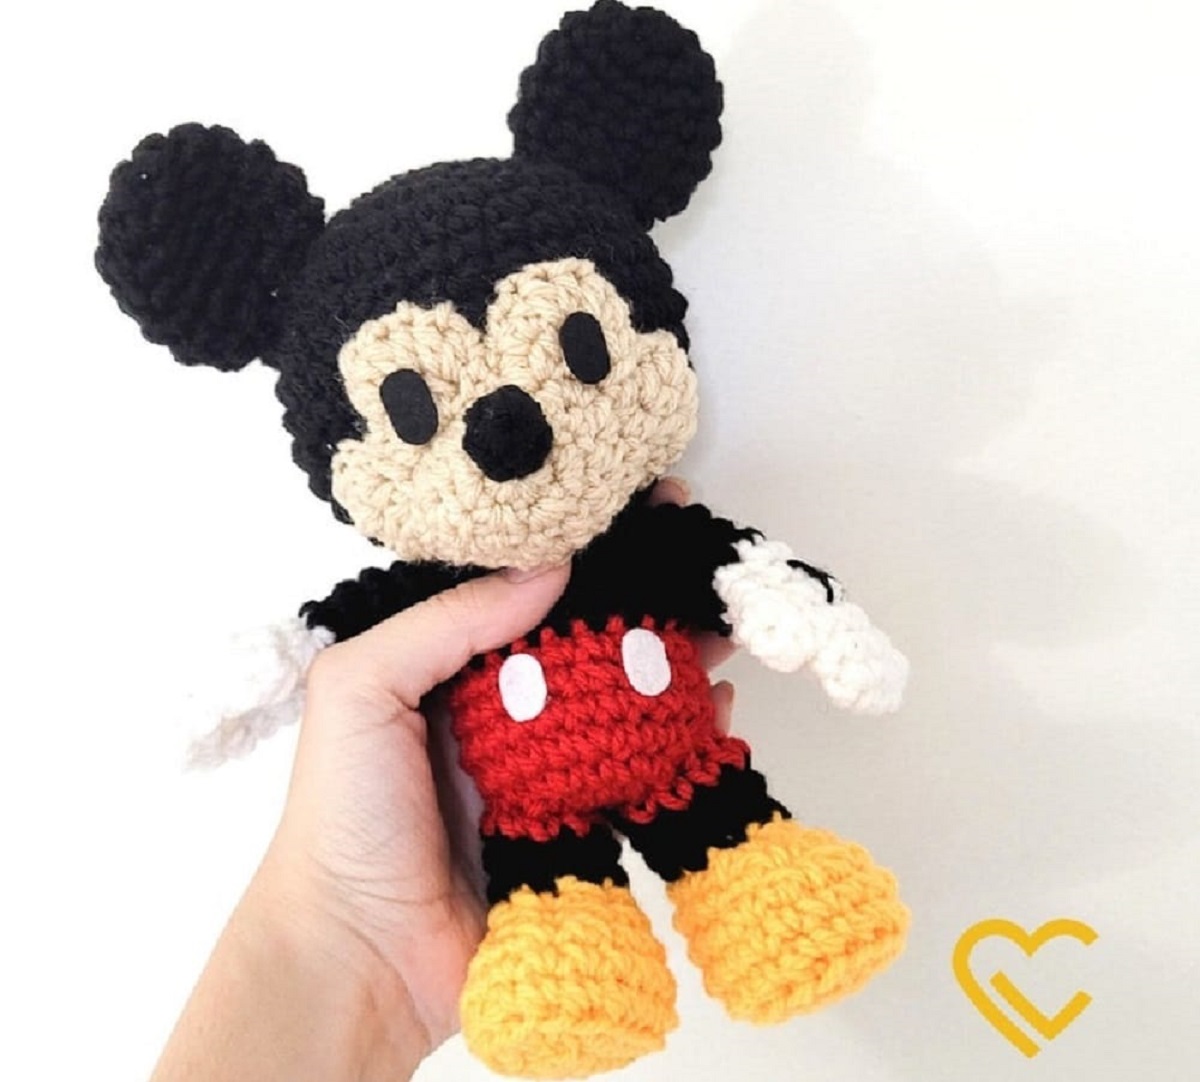 Mini crochet Mickey Mouse toy with black eyes and a nose wearing red shorts with white spots and yellow shoes helped by a hand.